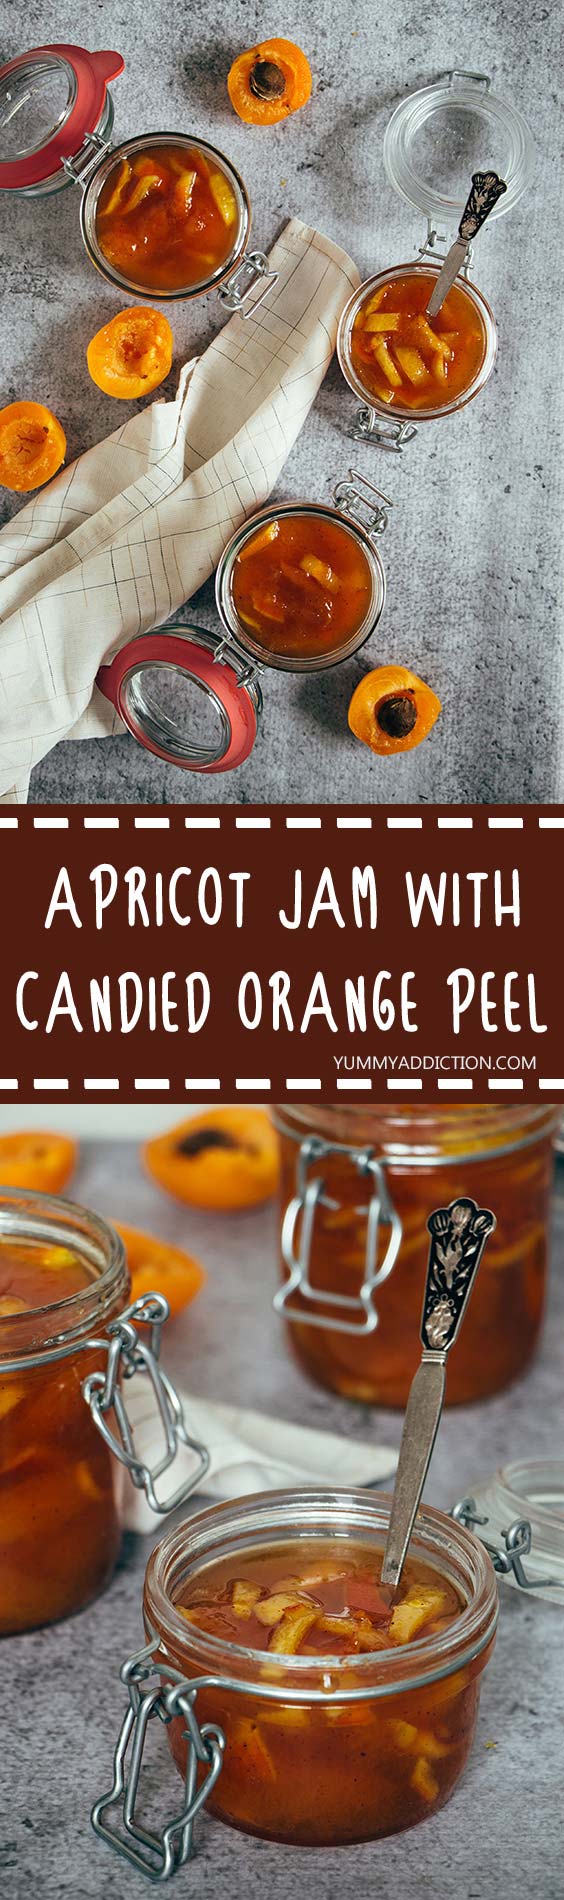 This homemade Apricot Jam is infused with cinnamon and also features candied orange peel! Great on toasts, with cheese, or anywhere you can think of! | yummyaddiction.com